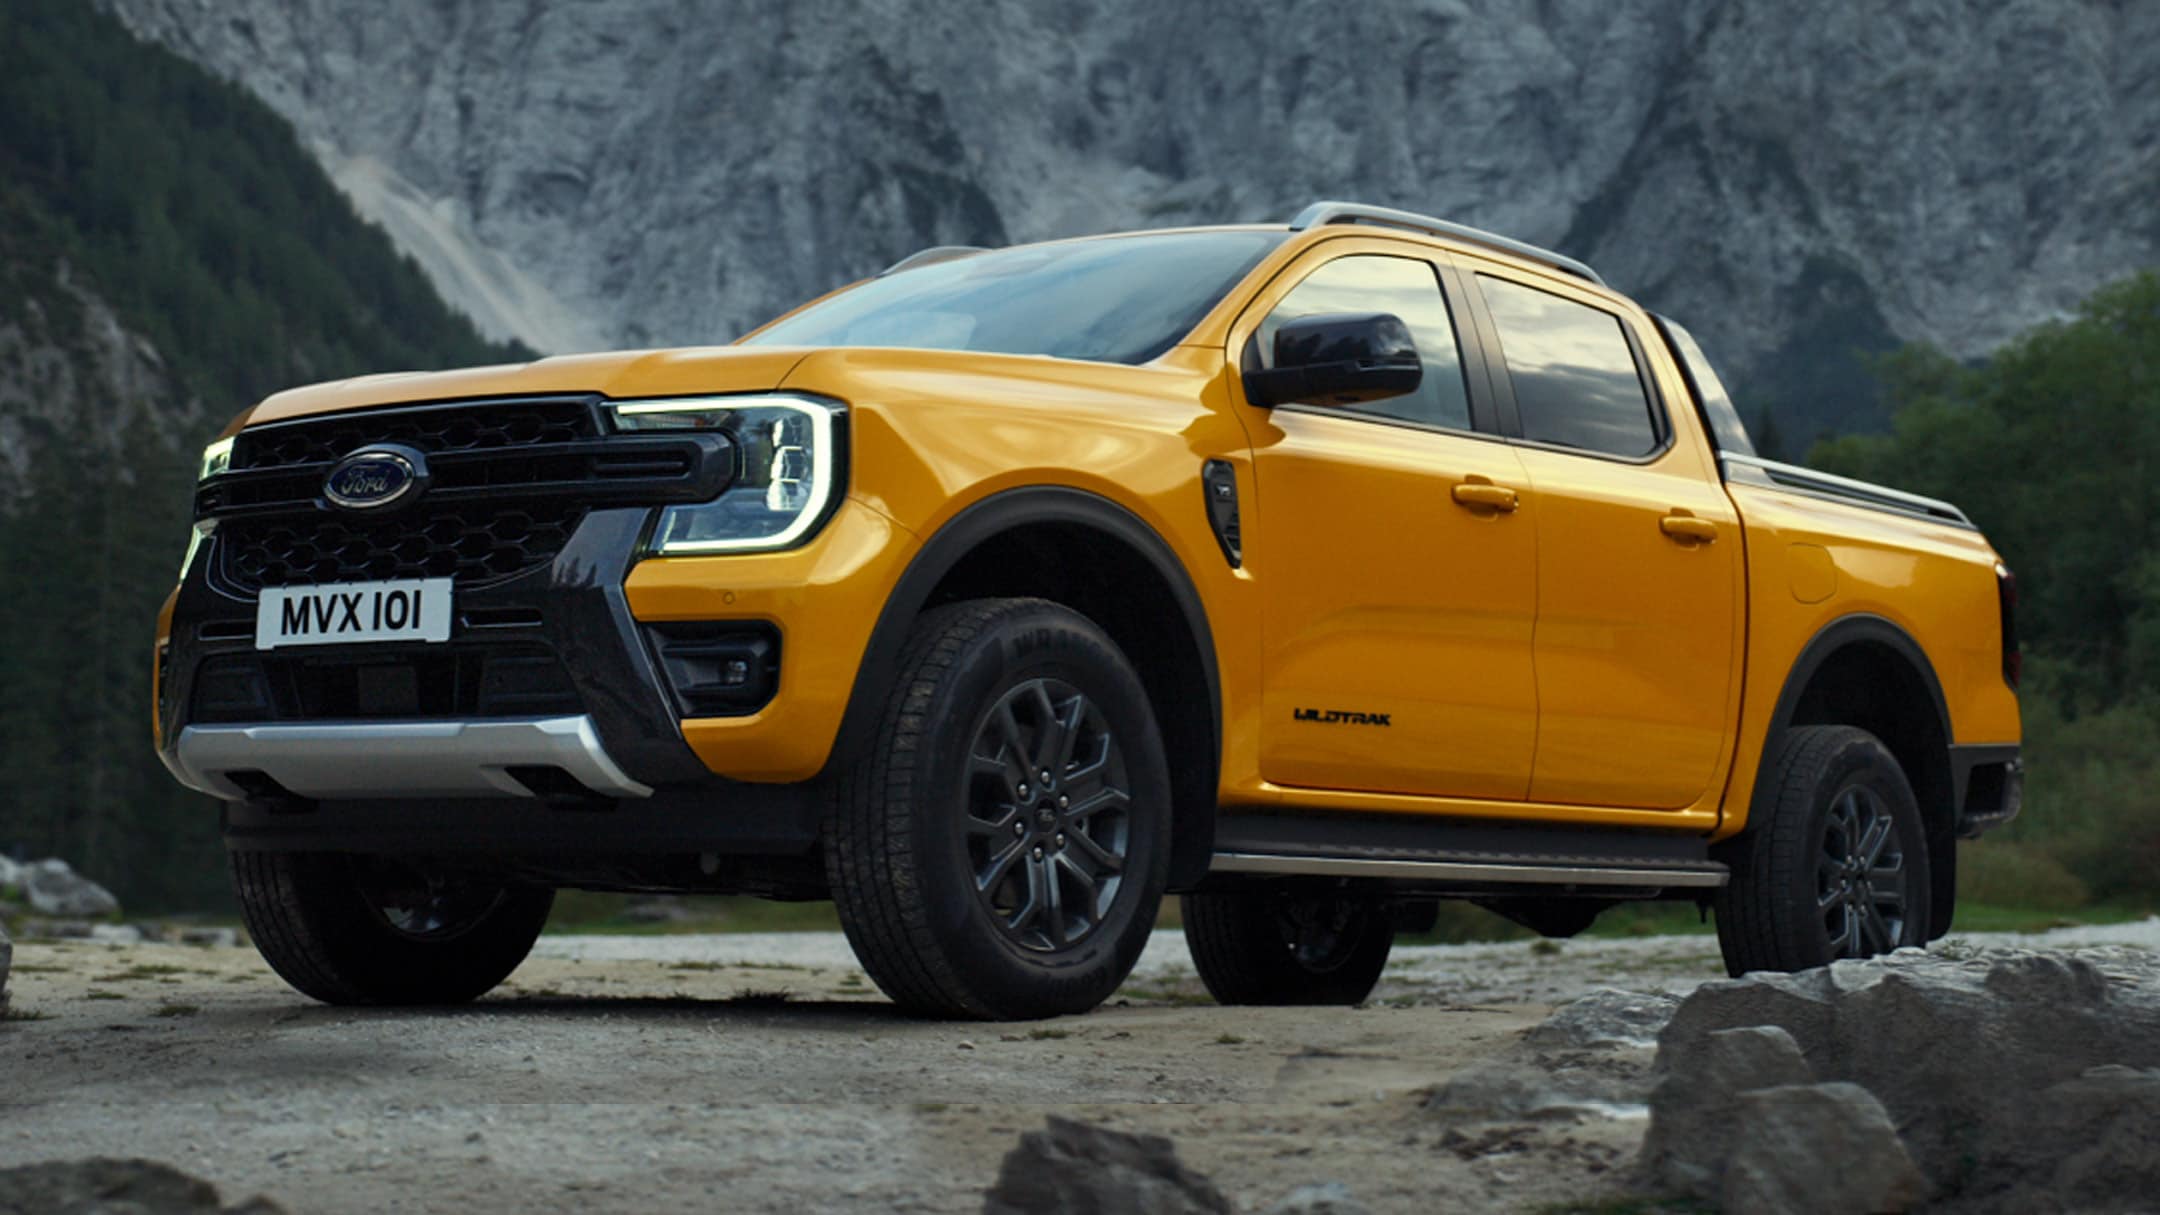 All-New Ford Ranger front 3/4 view parked by mountains